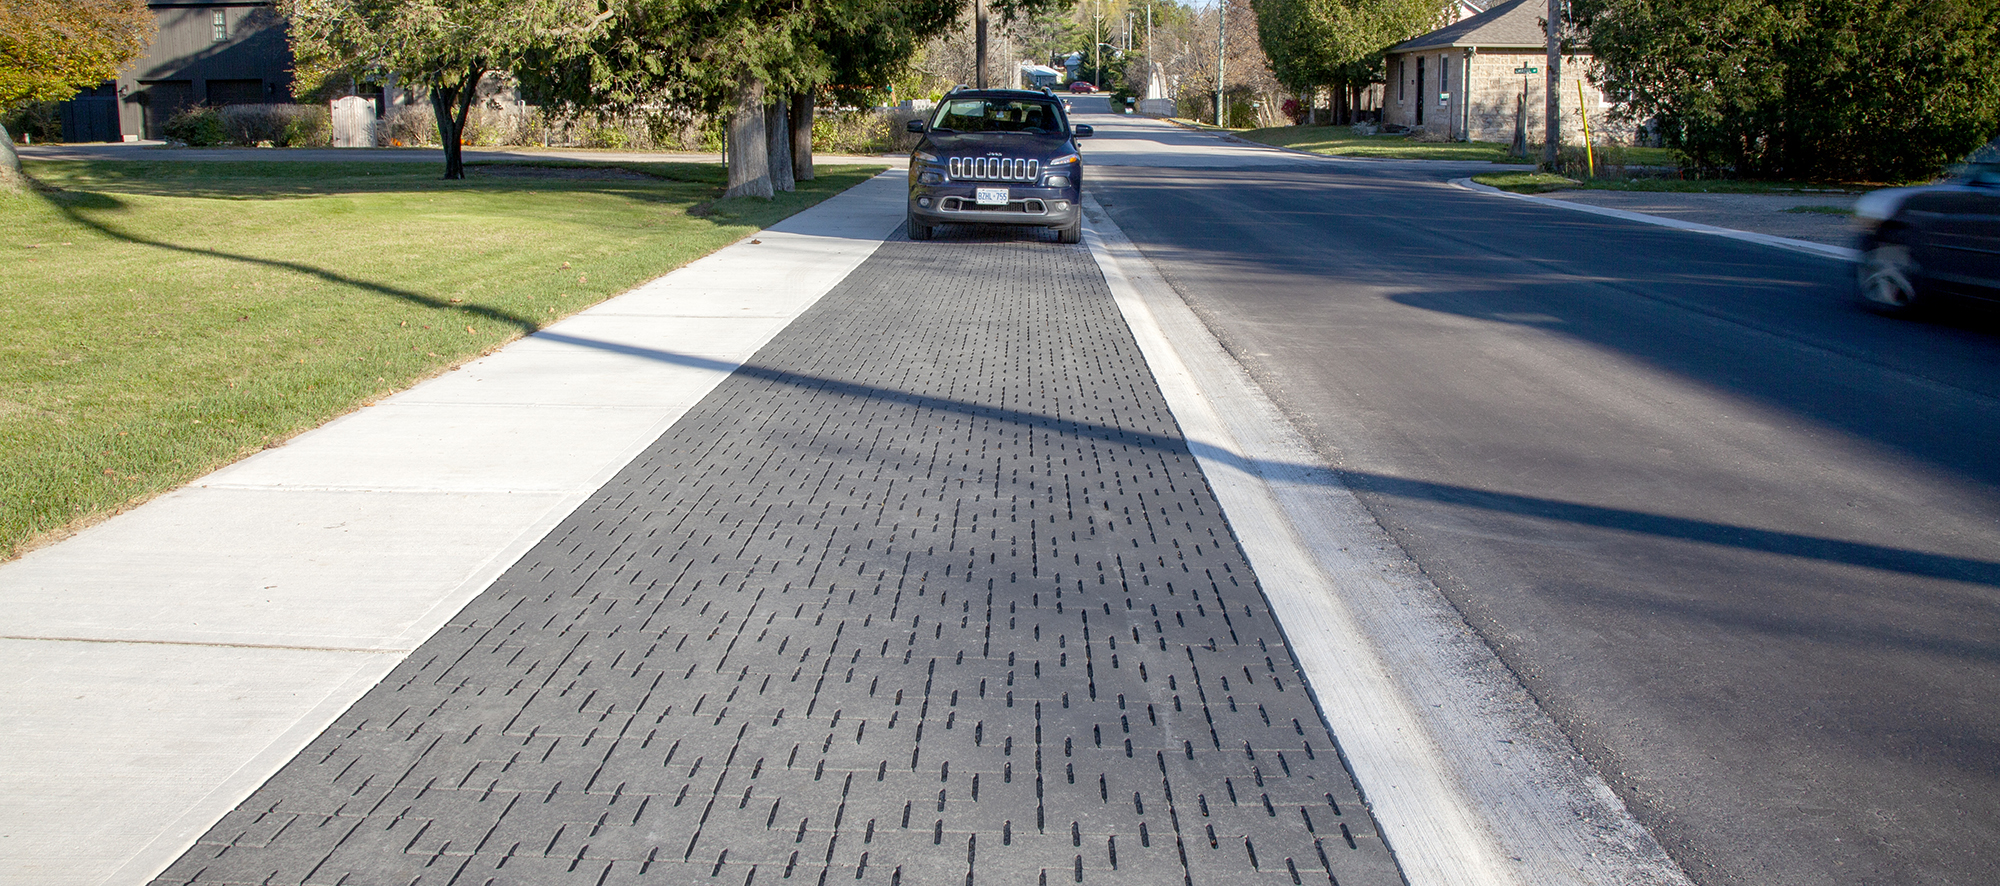 Parking lane on a residential street paved with Unilock Dura-Flow permeable pavers.